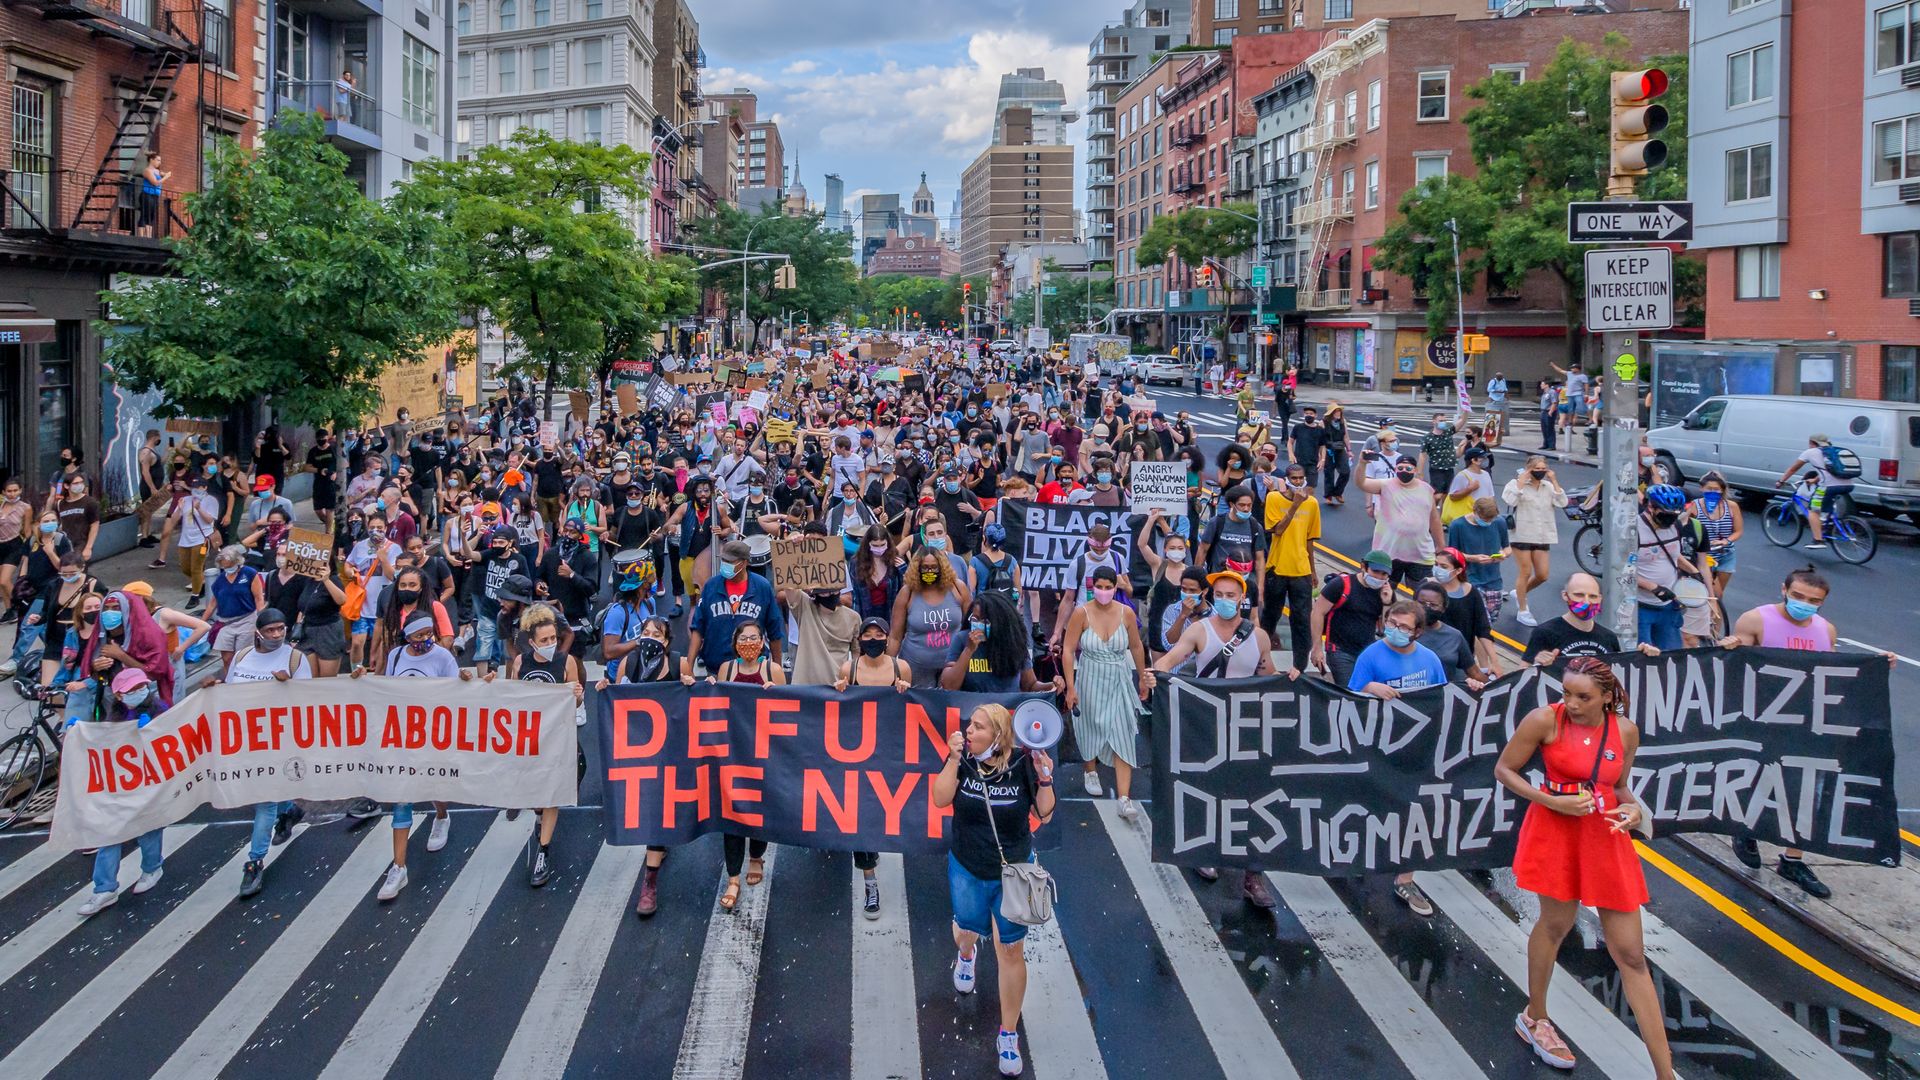 A large crowd holds signs that read "defund the police" and "abolish, disarm"